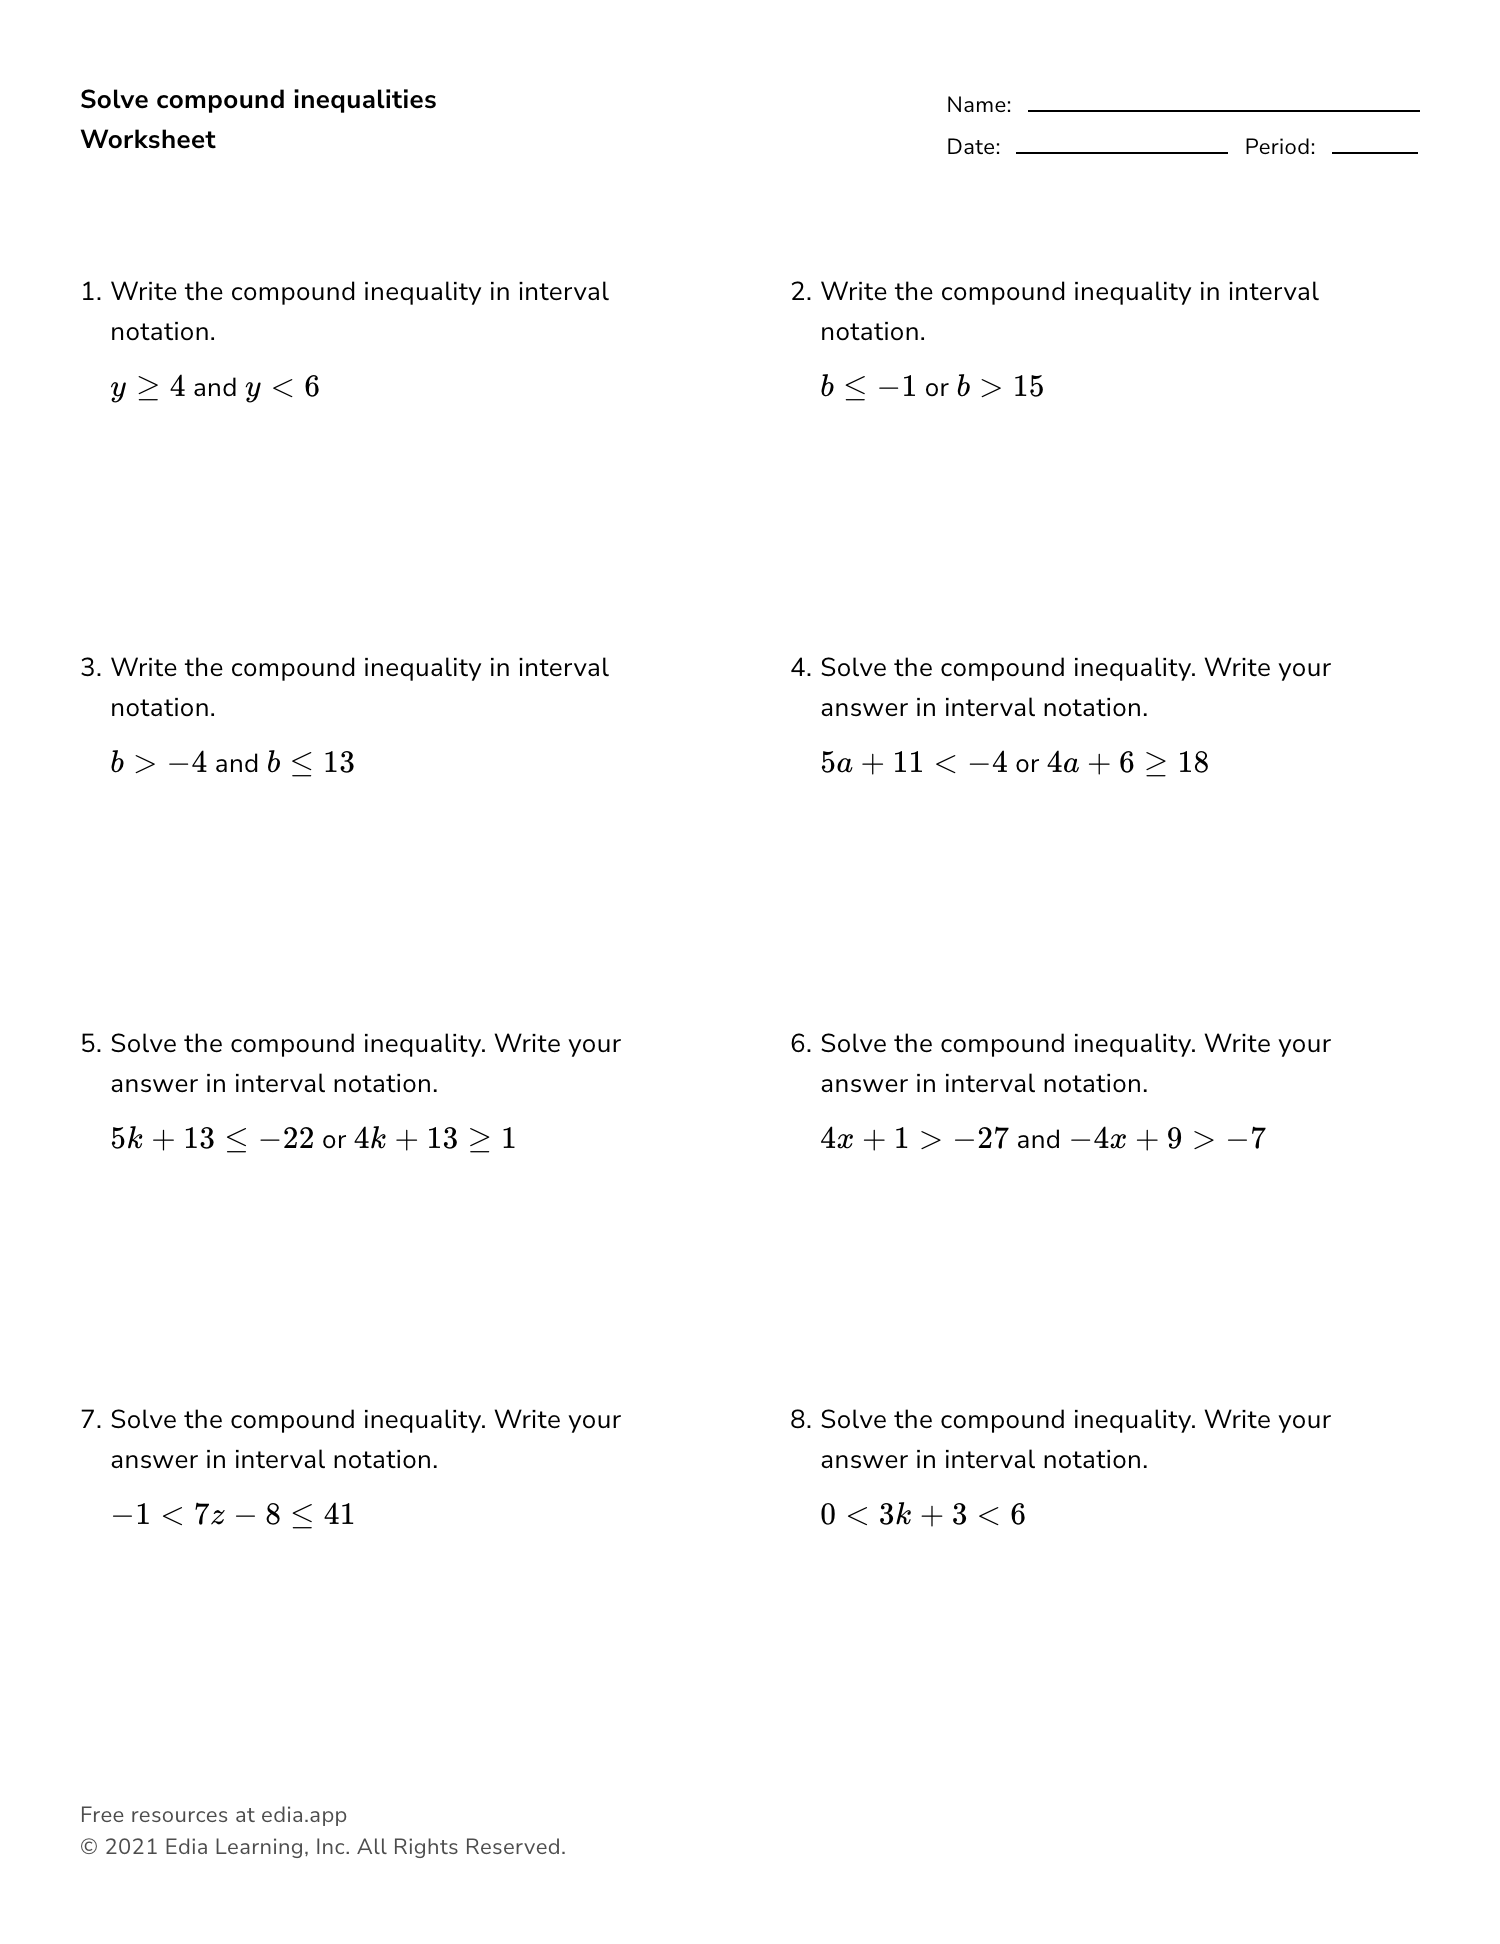 Solve Compound Inequalities - Worksheet Within Solving Compound Inequalities Worksheet